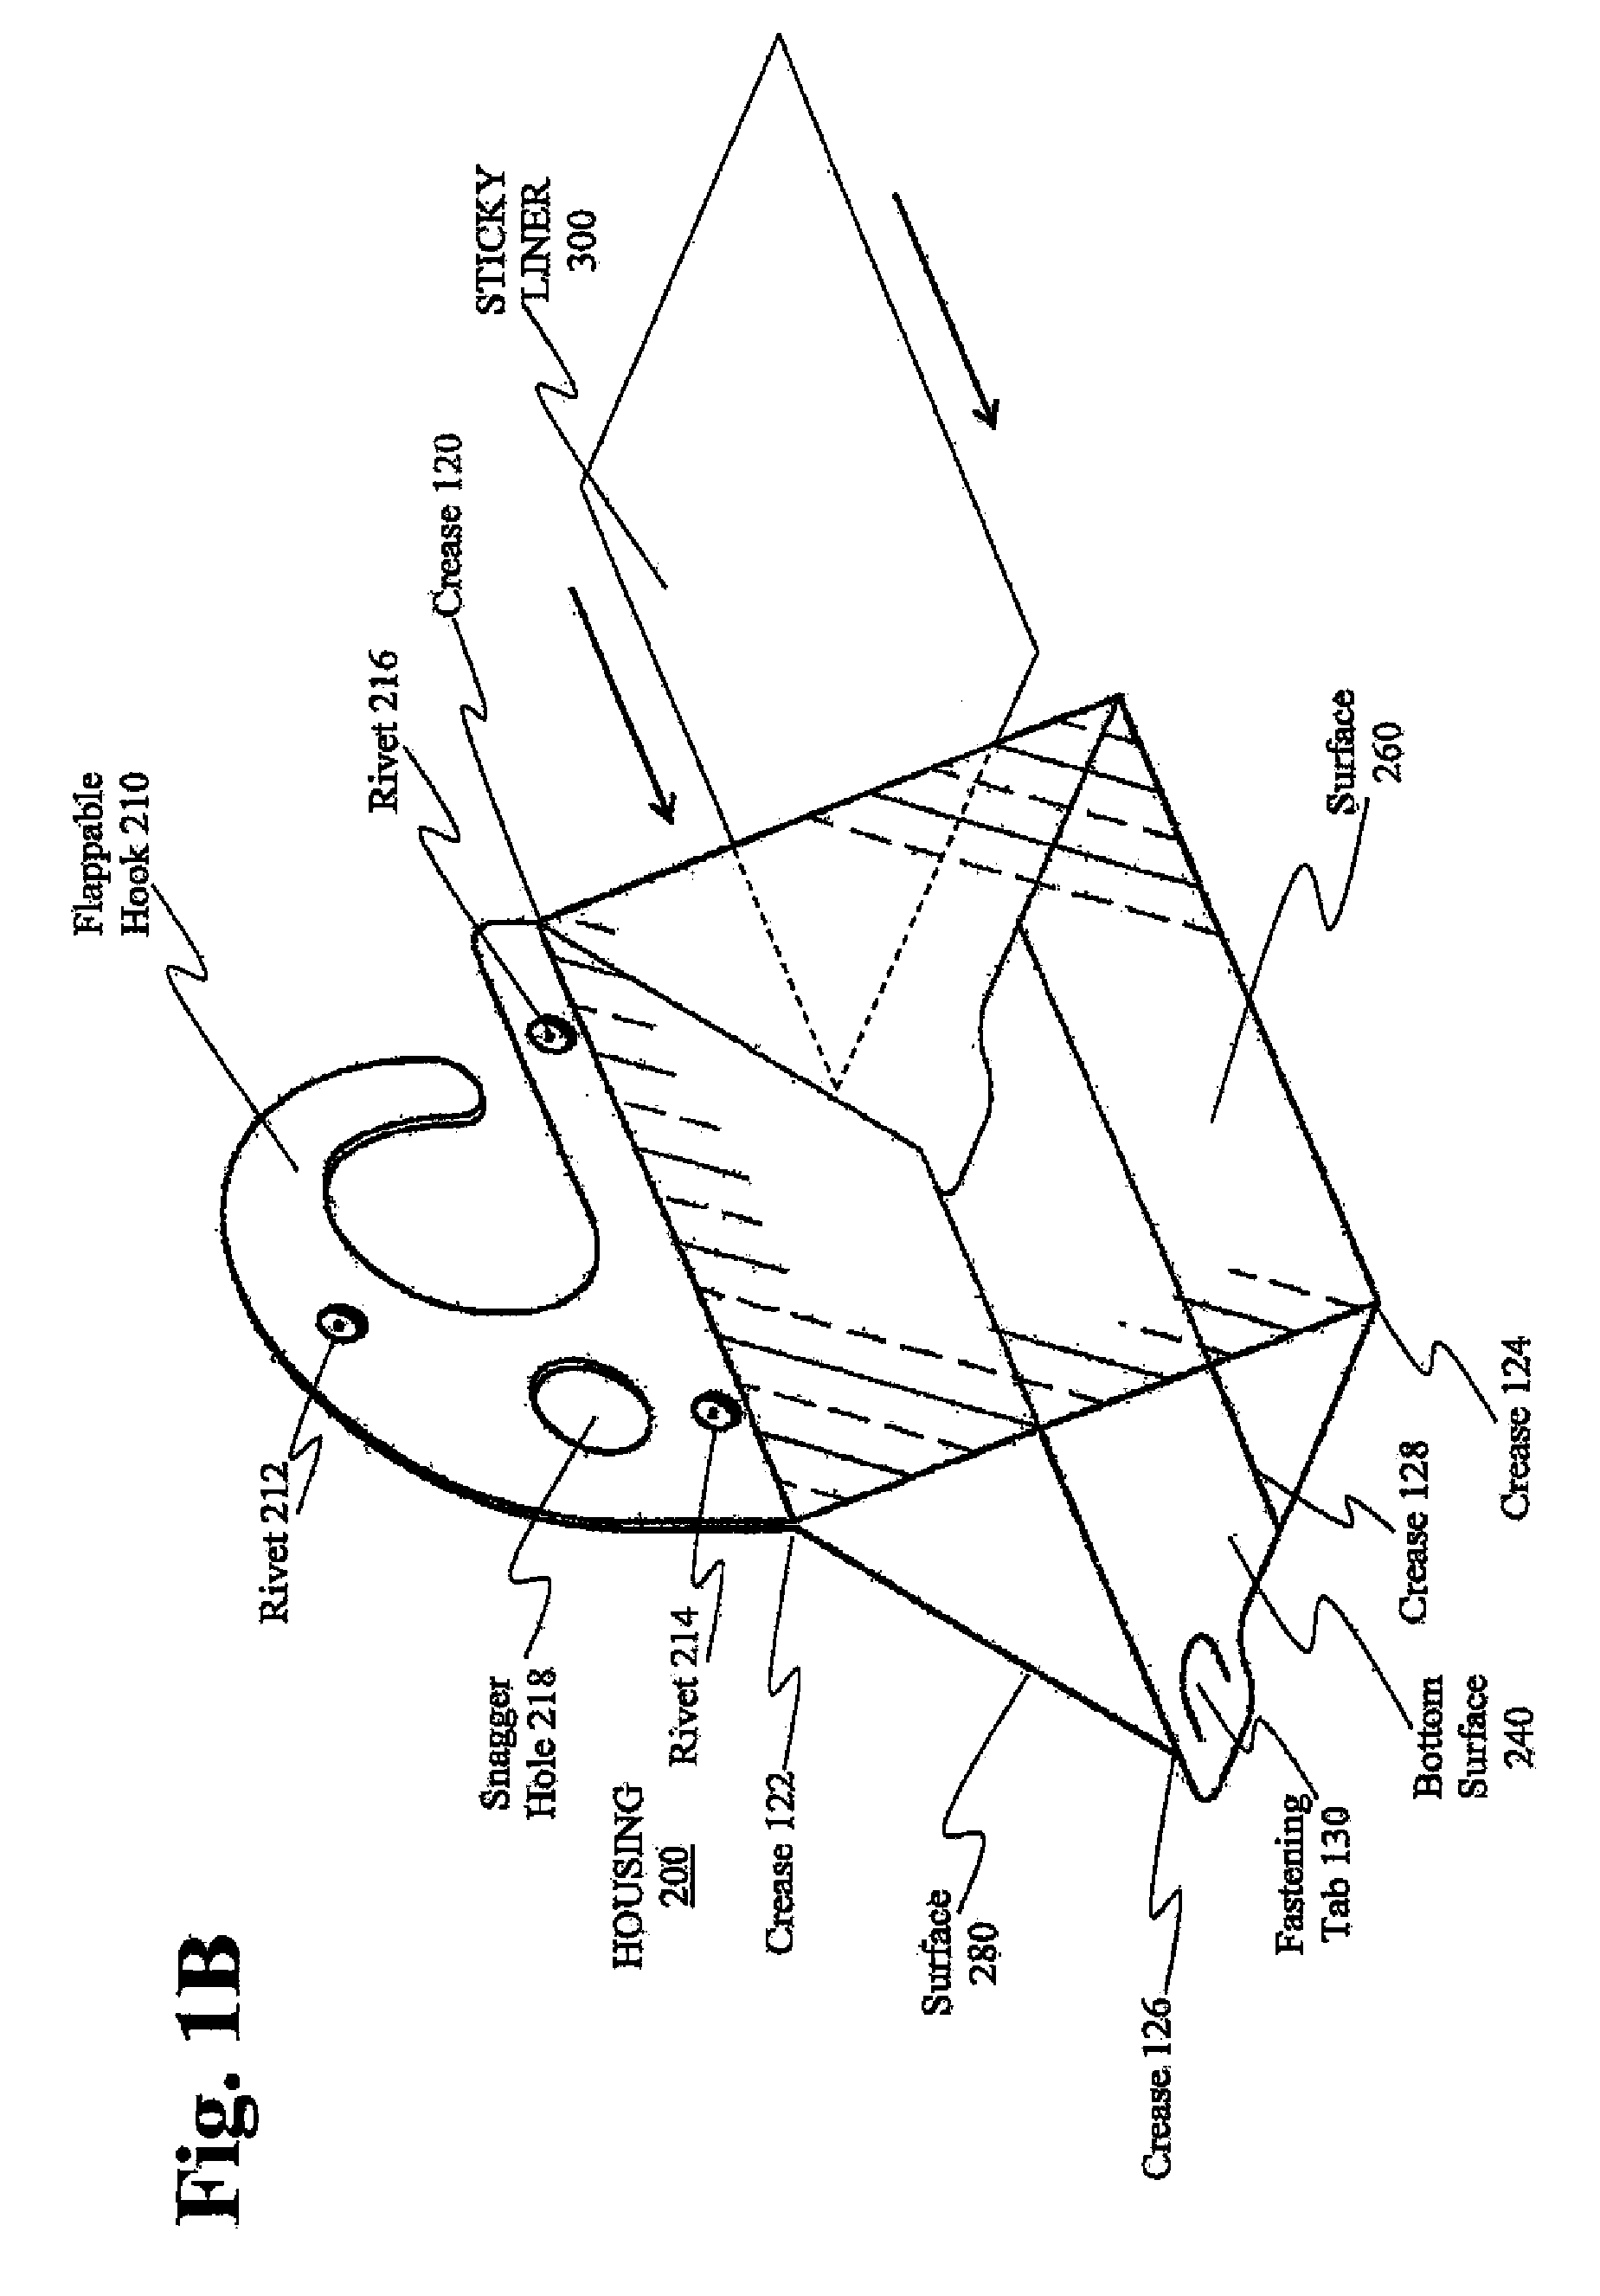 Method and apparatus for trapping insects